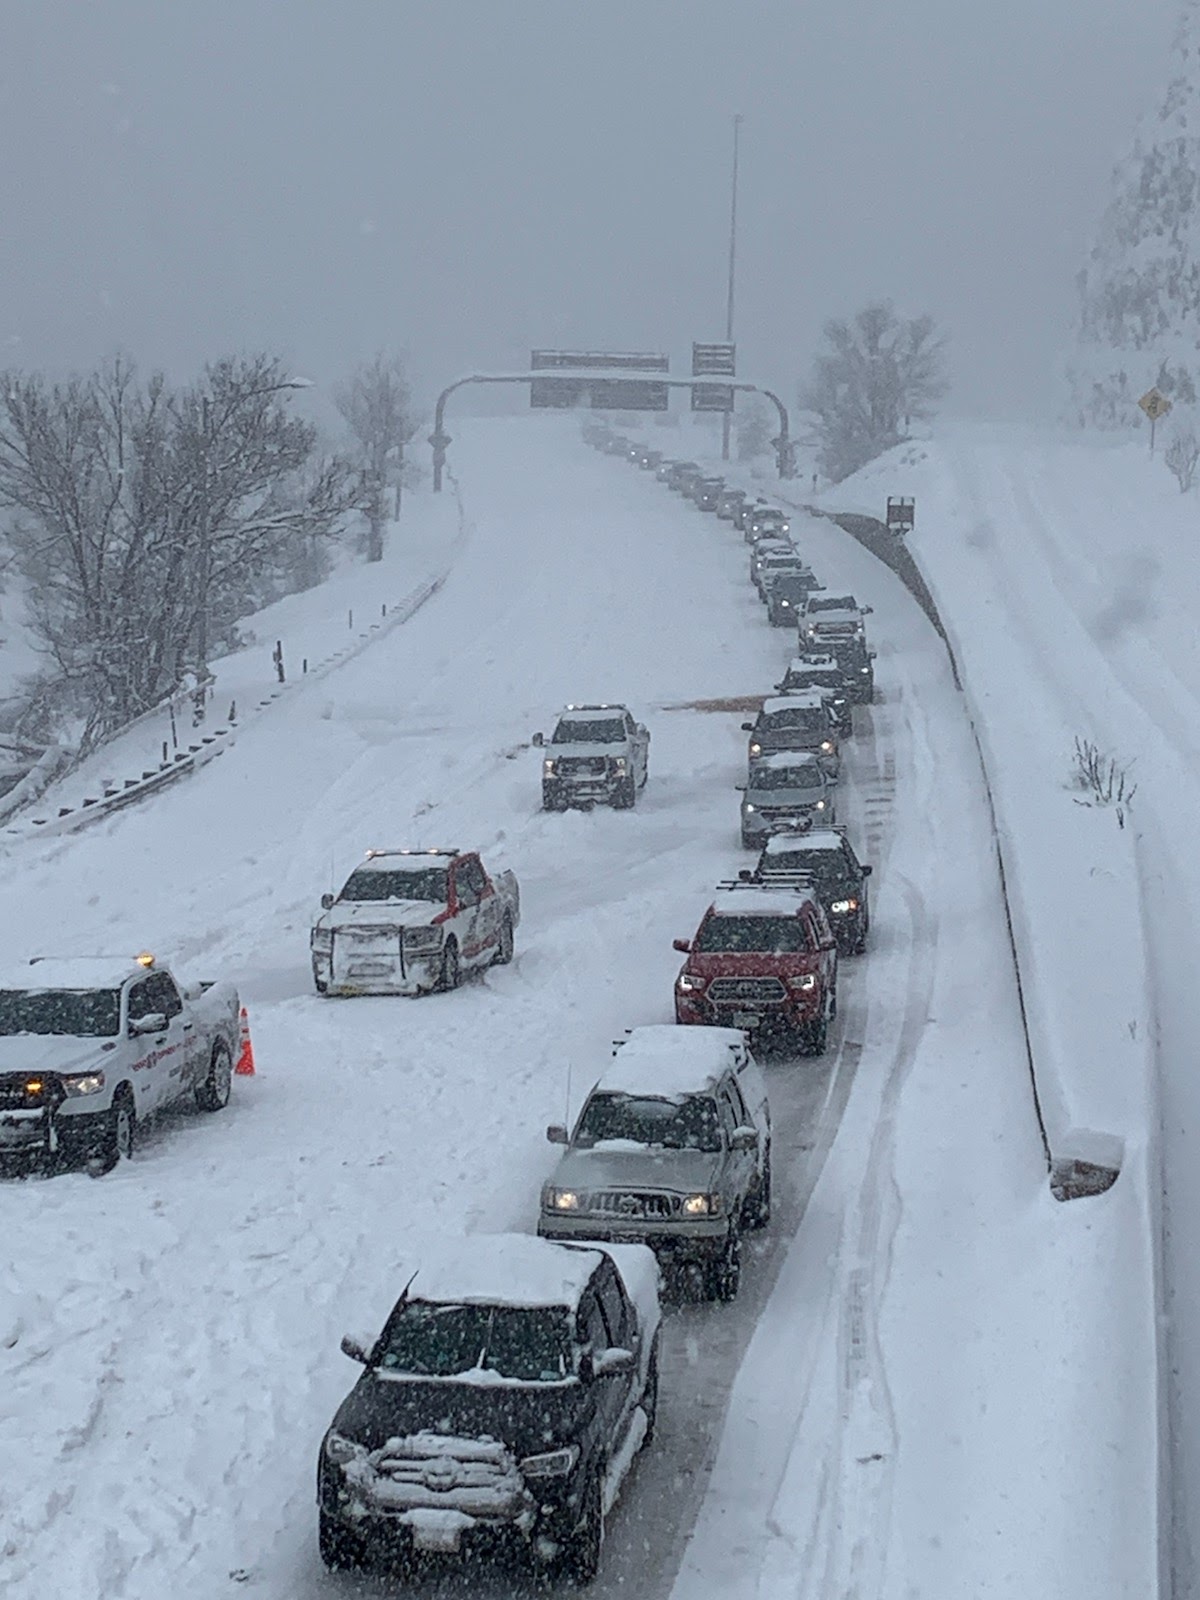 Traffic on I-70 Floyd Hill on March 14, 2021 detail image